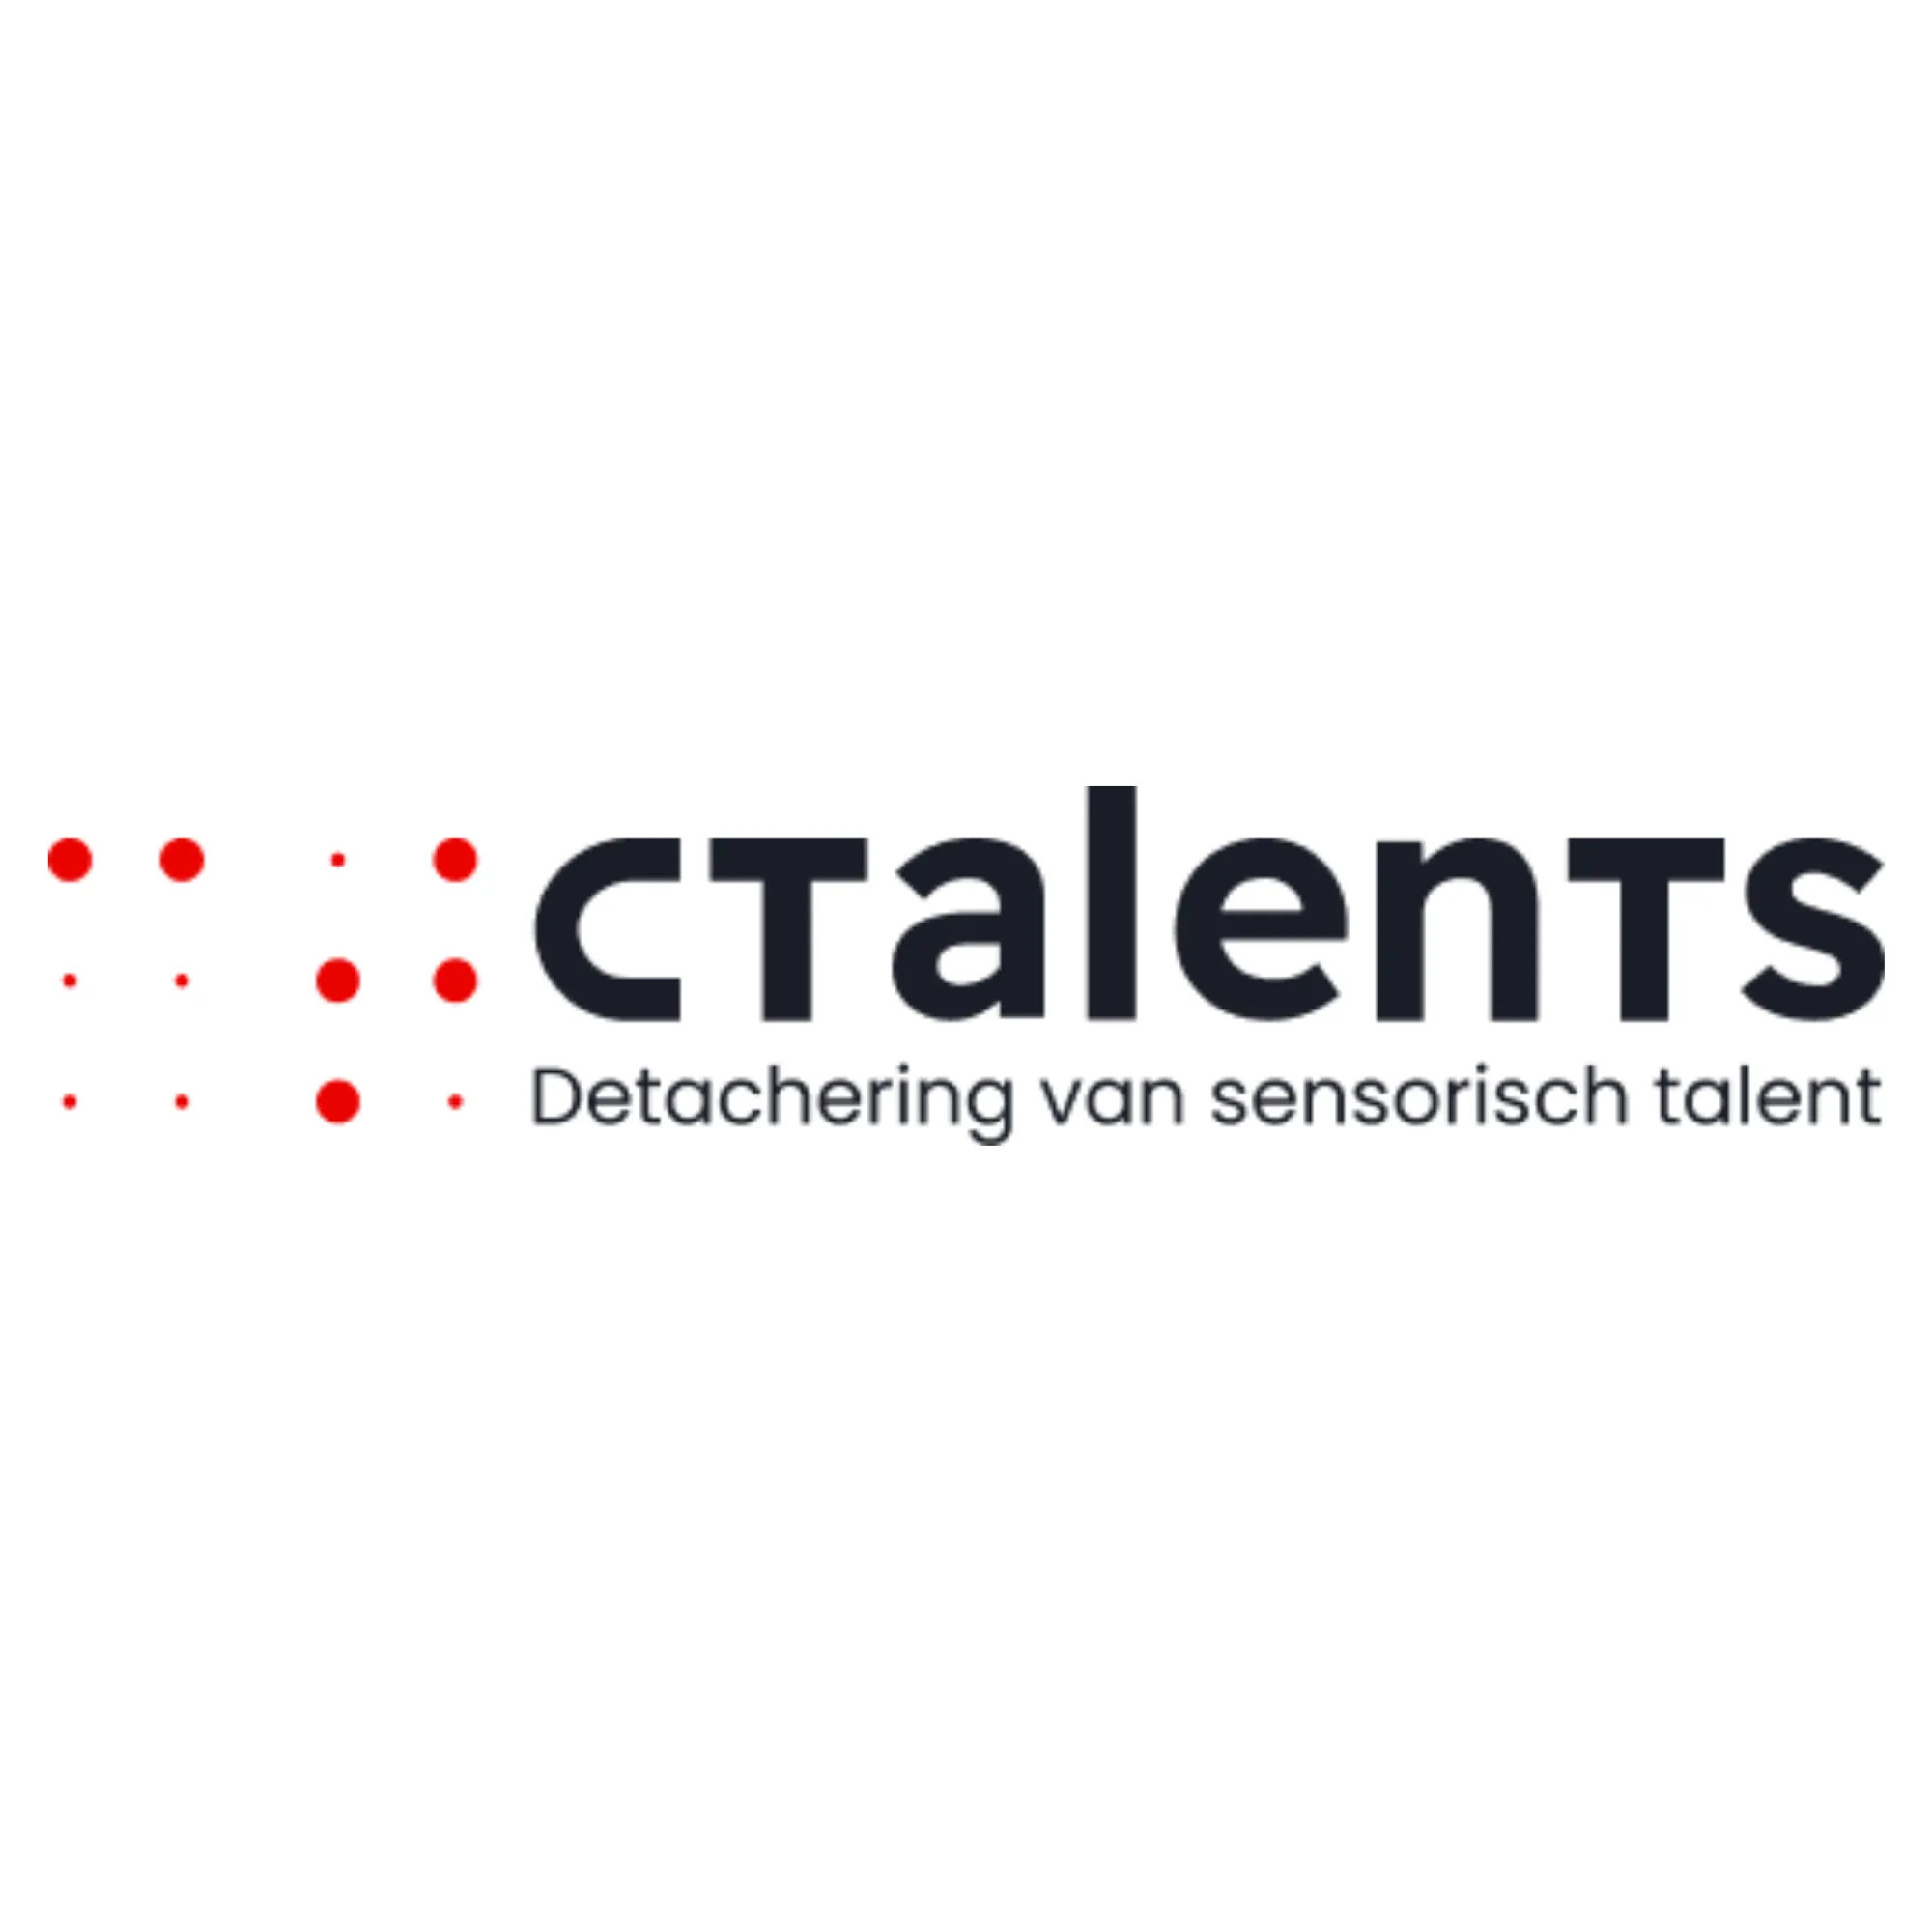 Logo C-talents, letter 'c' and 't' in red in braille, followed by the text: detachering van sensorisch talent